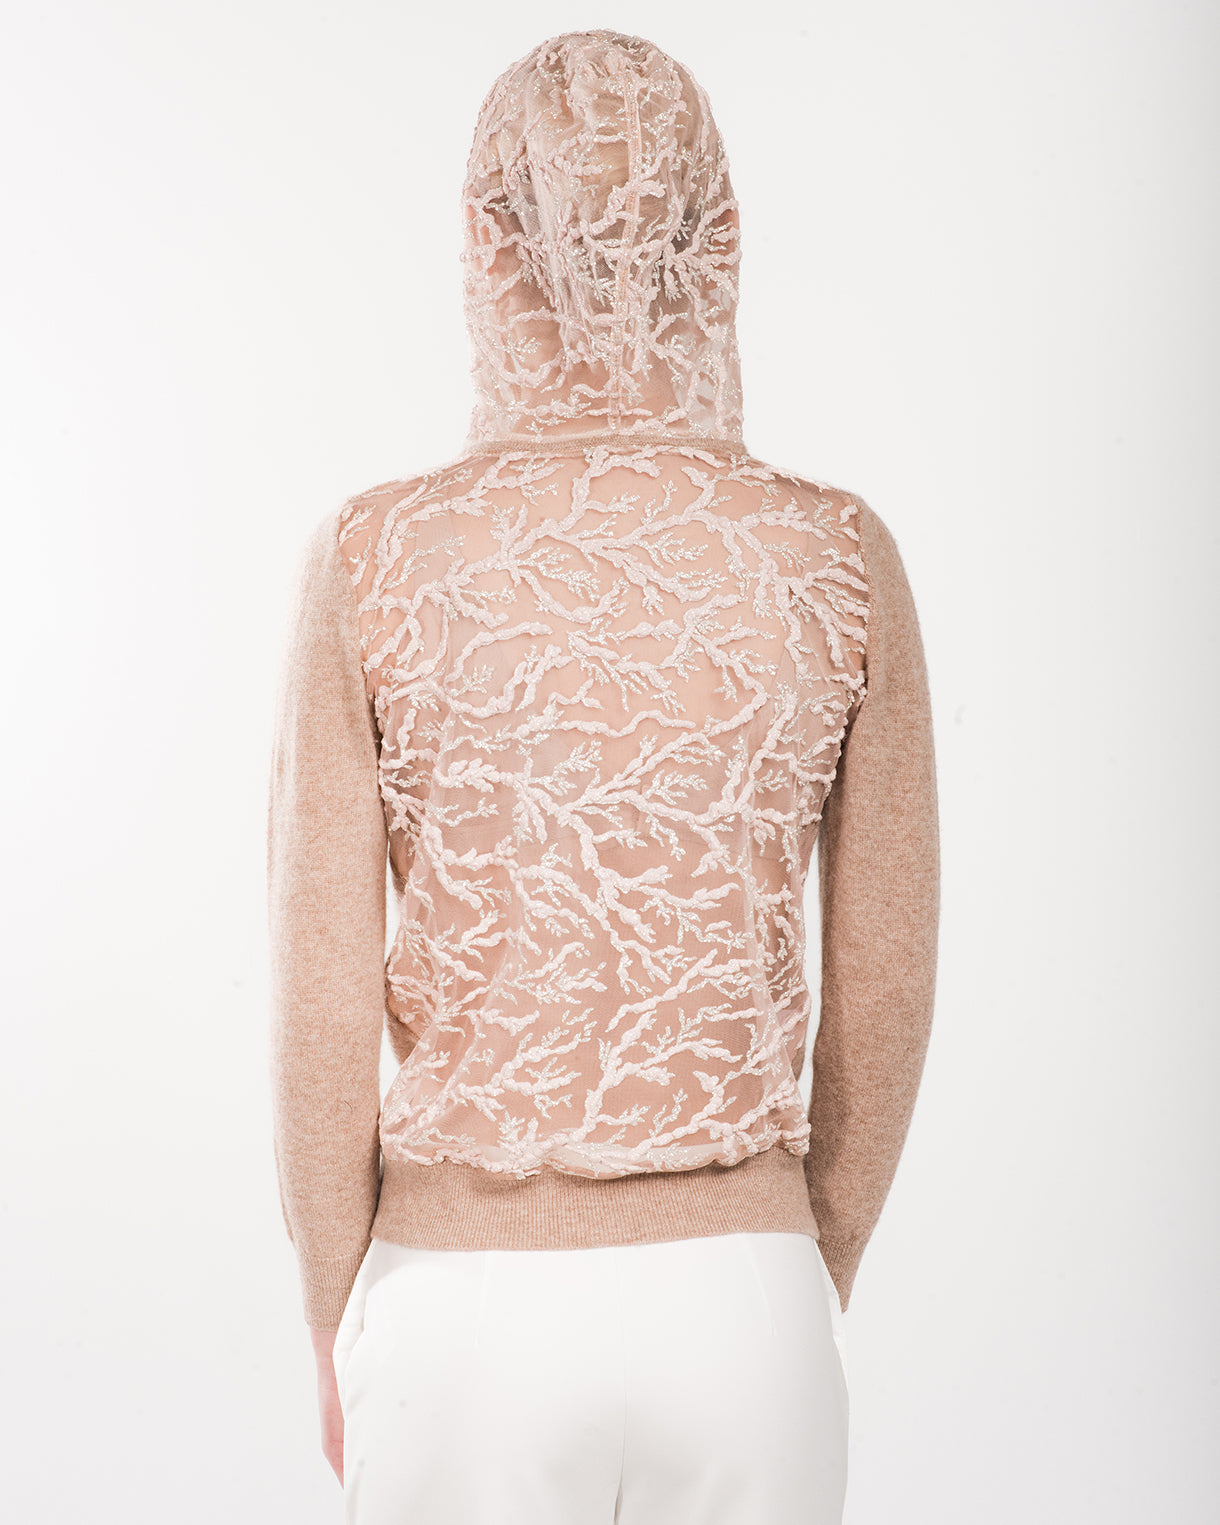 XS OATMEAL LONG SLEEVE CASHMERE HOODIE WITH BLUSH COLORED CORAL AND ICY SPARKLE EMBROIDERY ON TULLE BACK AND  HOOD WITH TULLE LINING